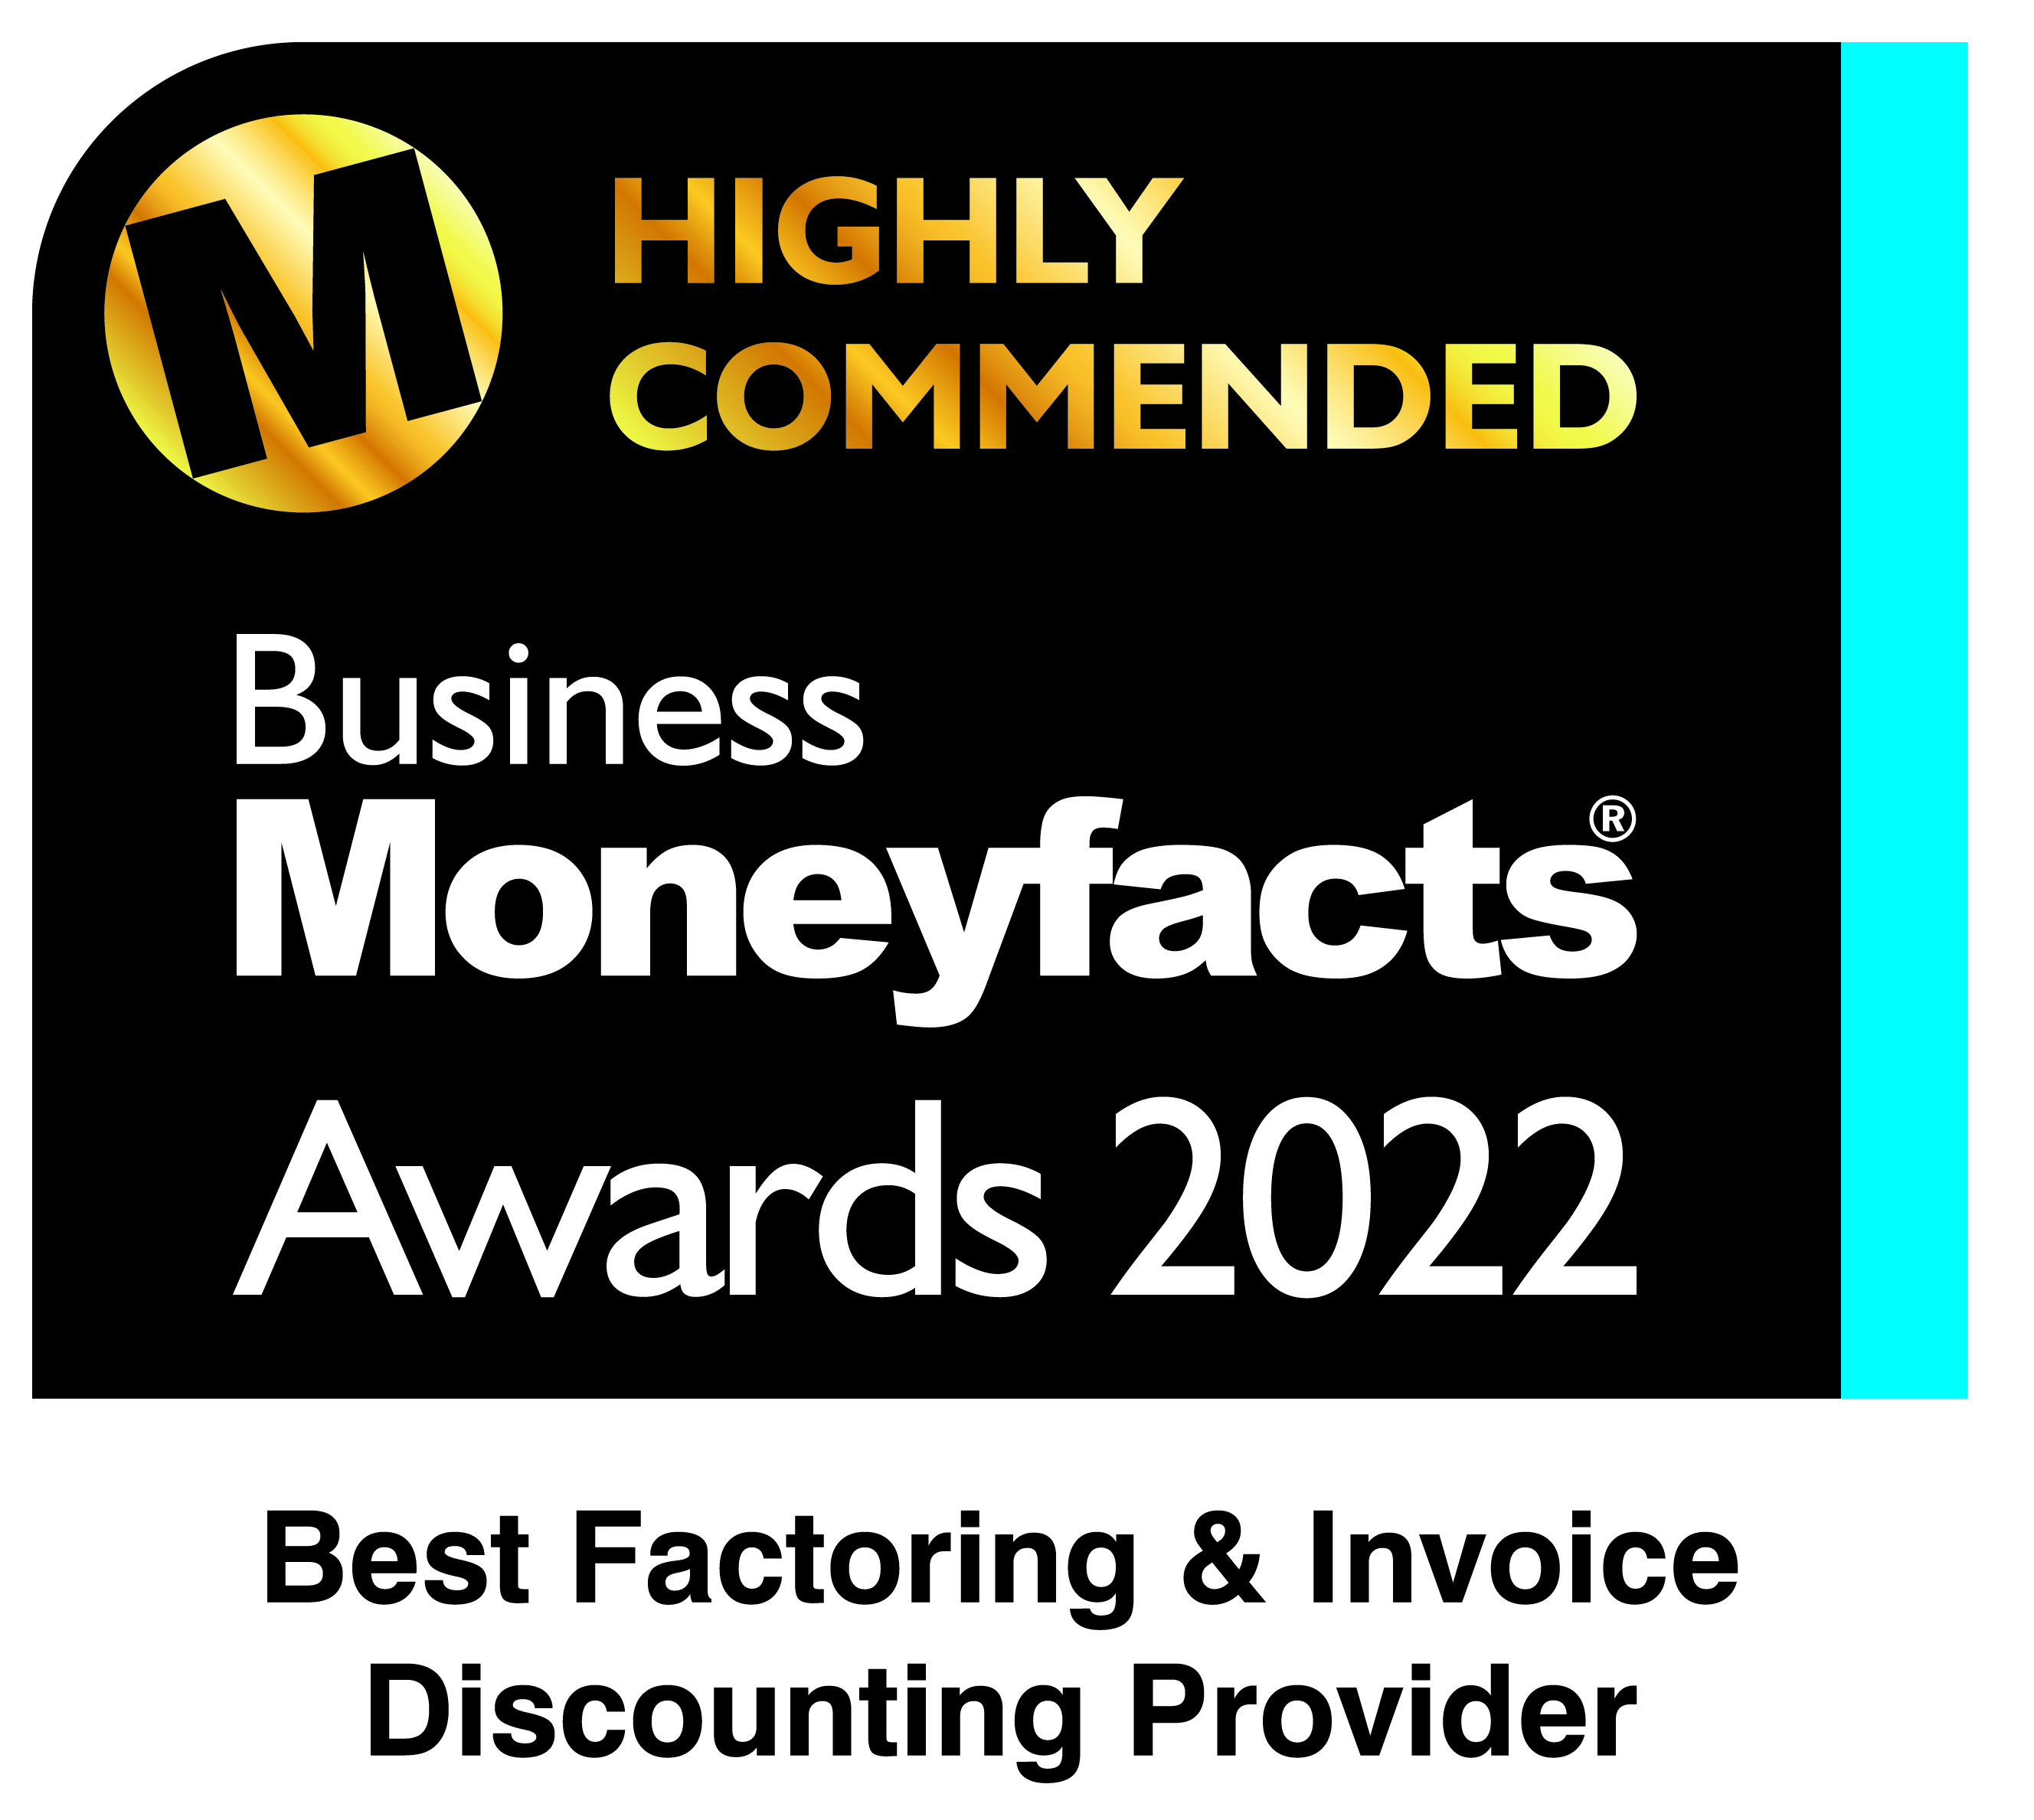 Highly commended provider 22